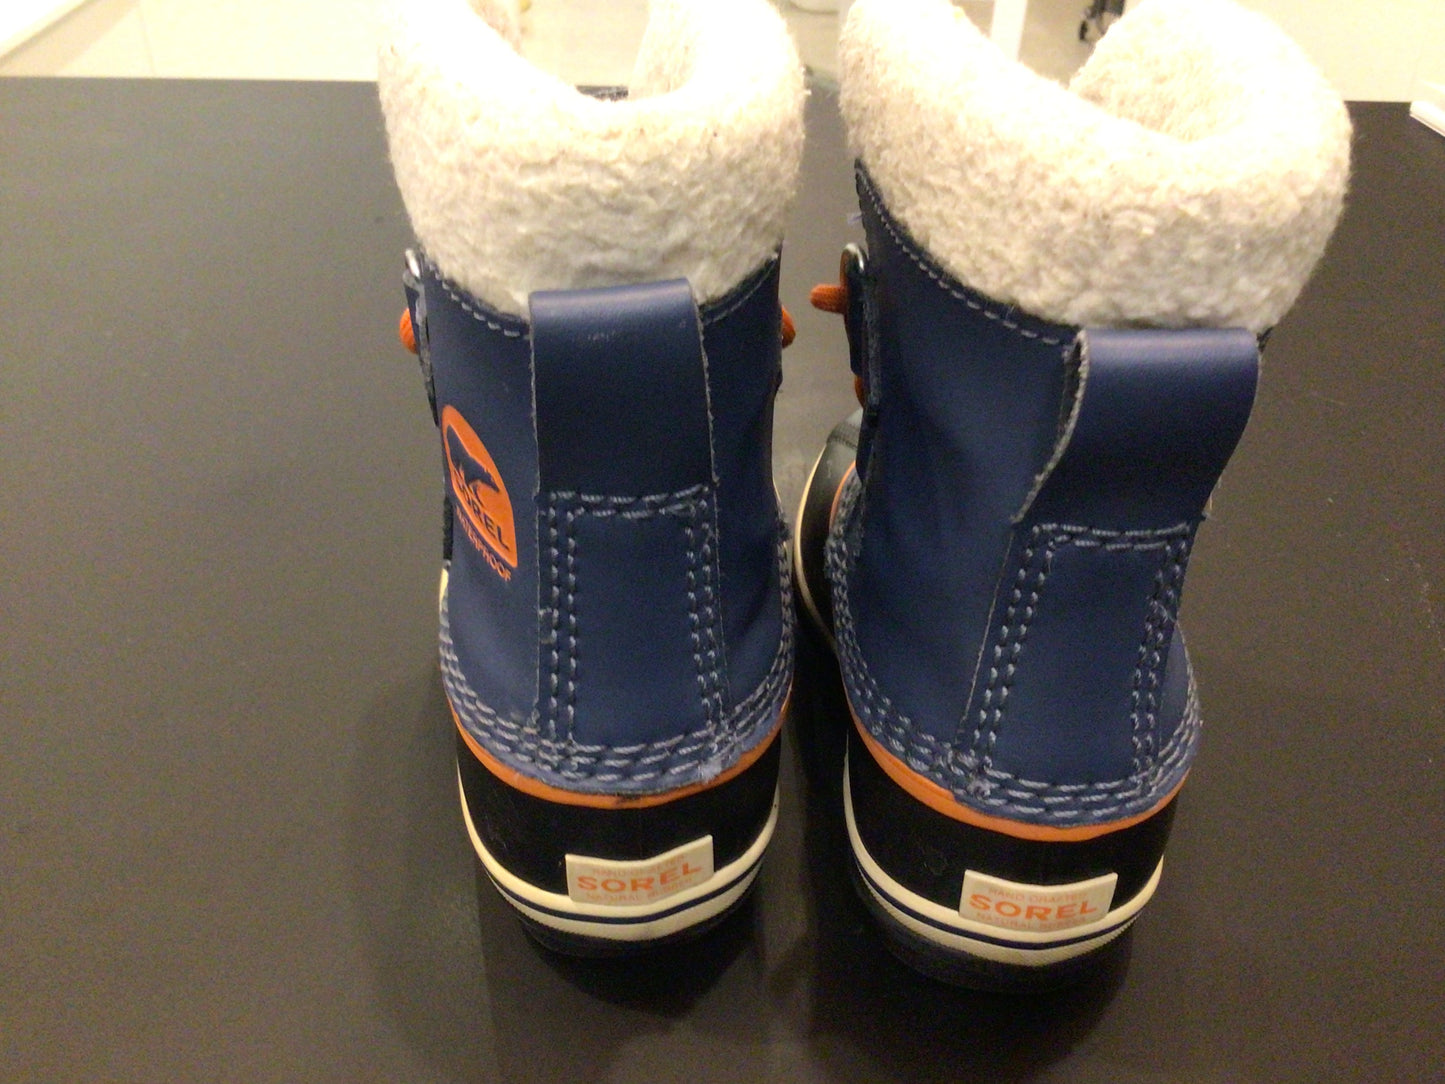 Consignment 4475-01 Toddler's sorel boots. Blue with orange laces. Size 8.